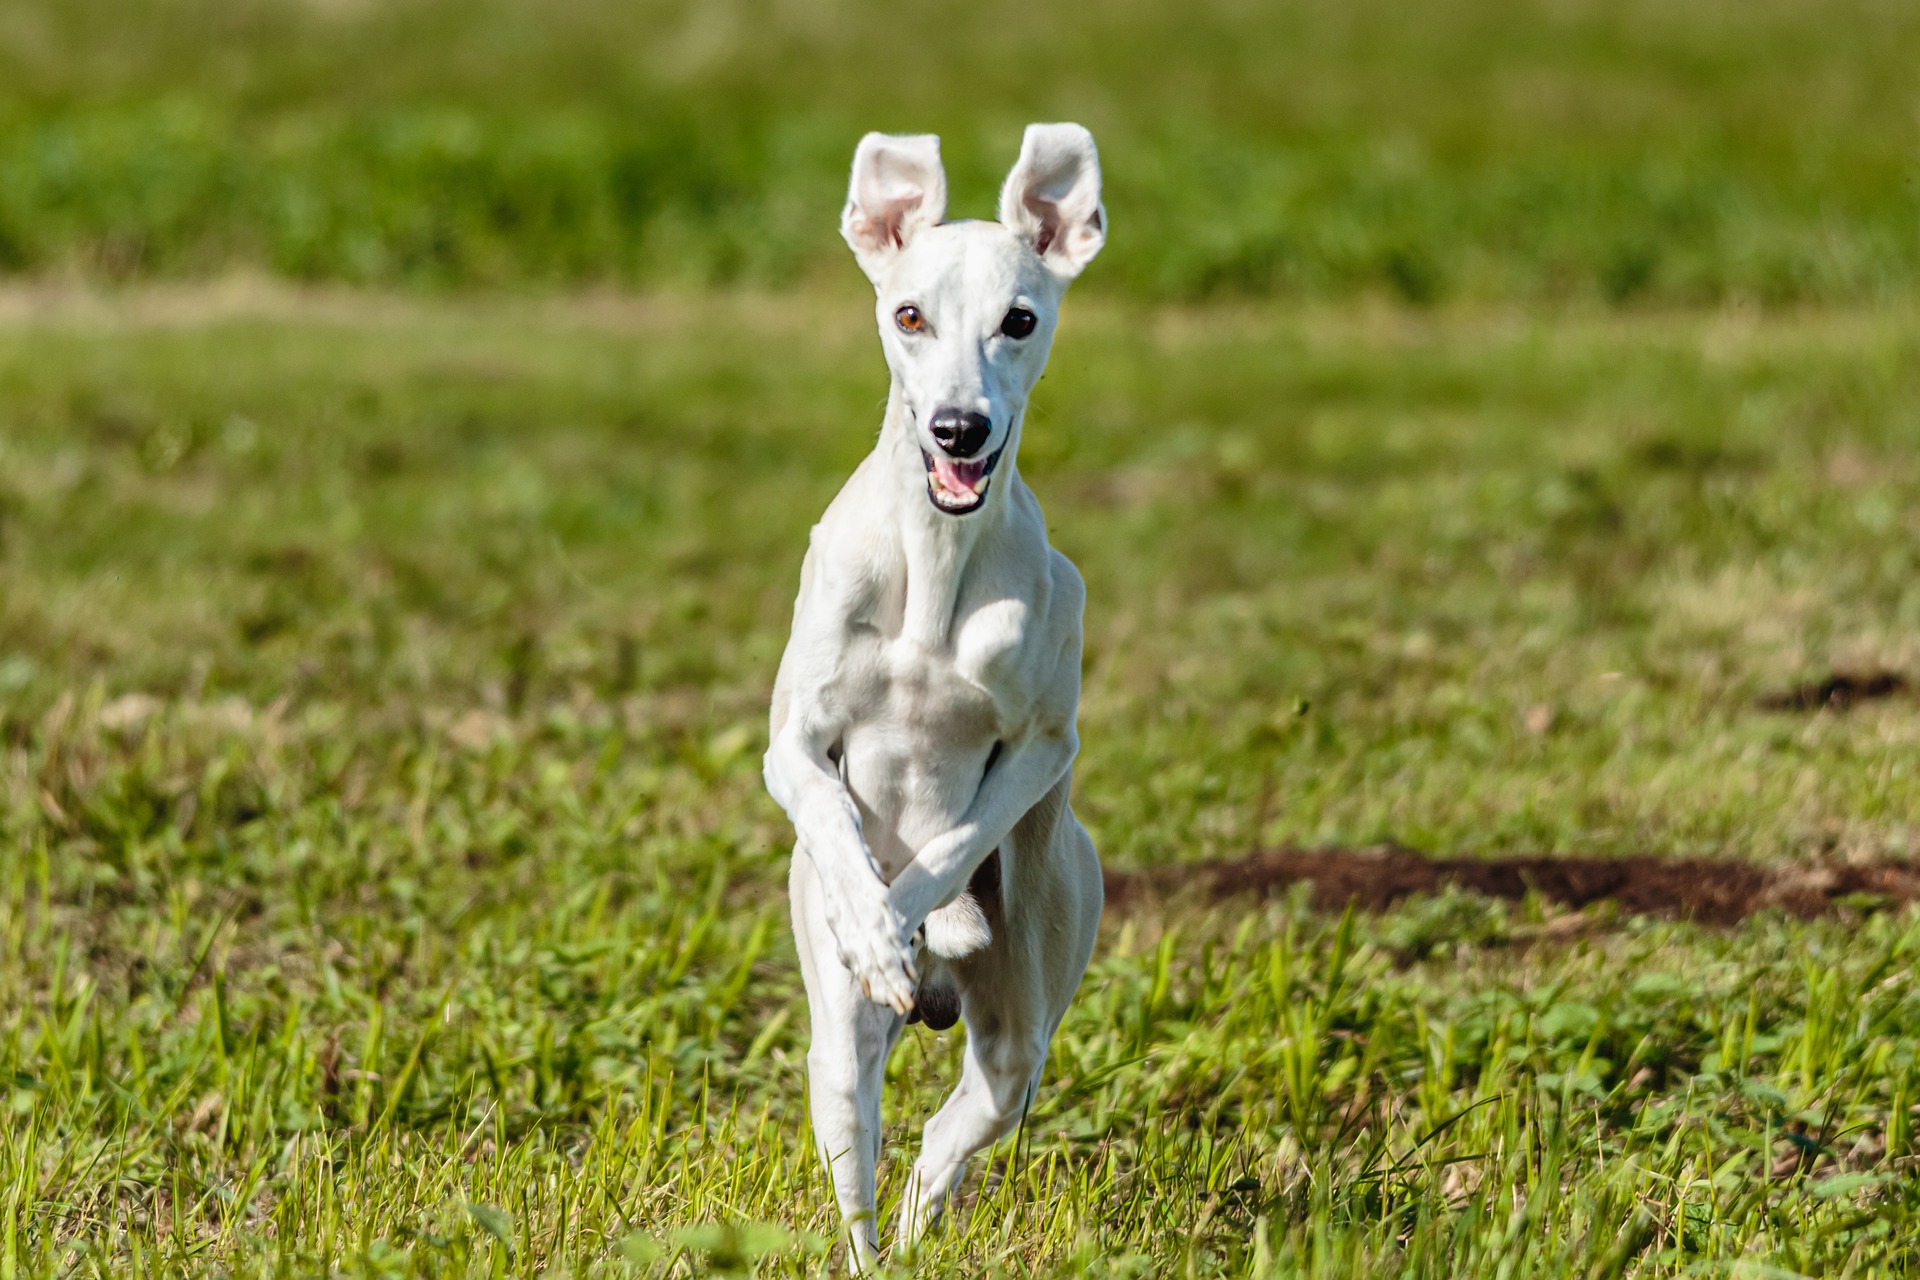 The Whippet dog breed gets more and more popular every year